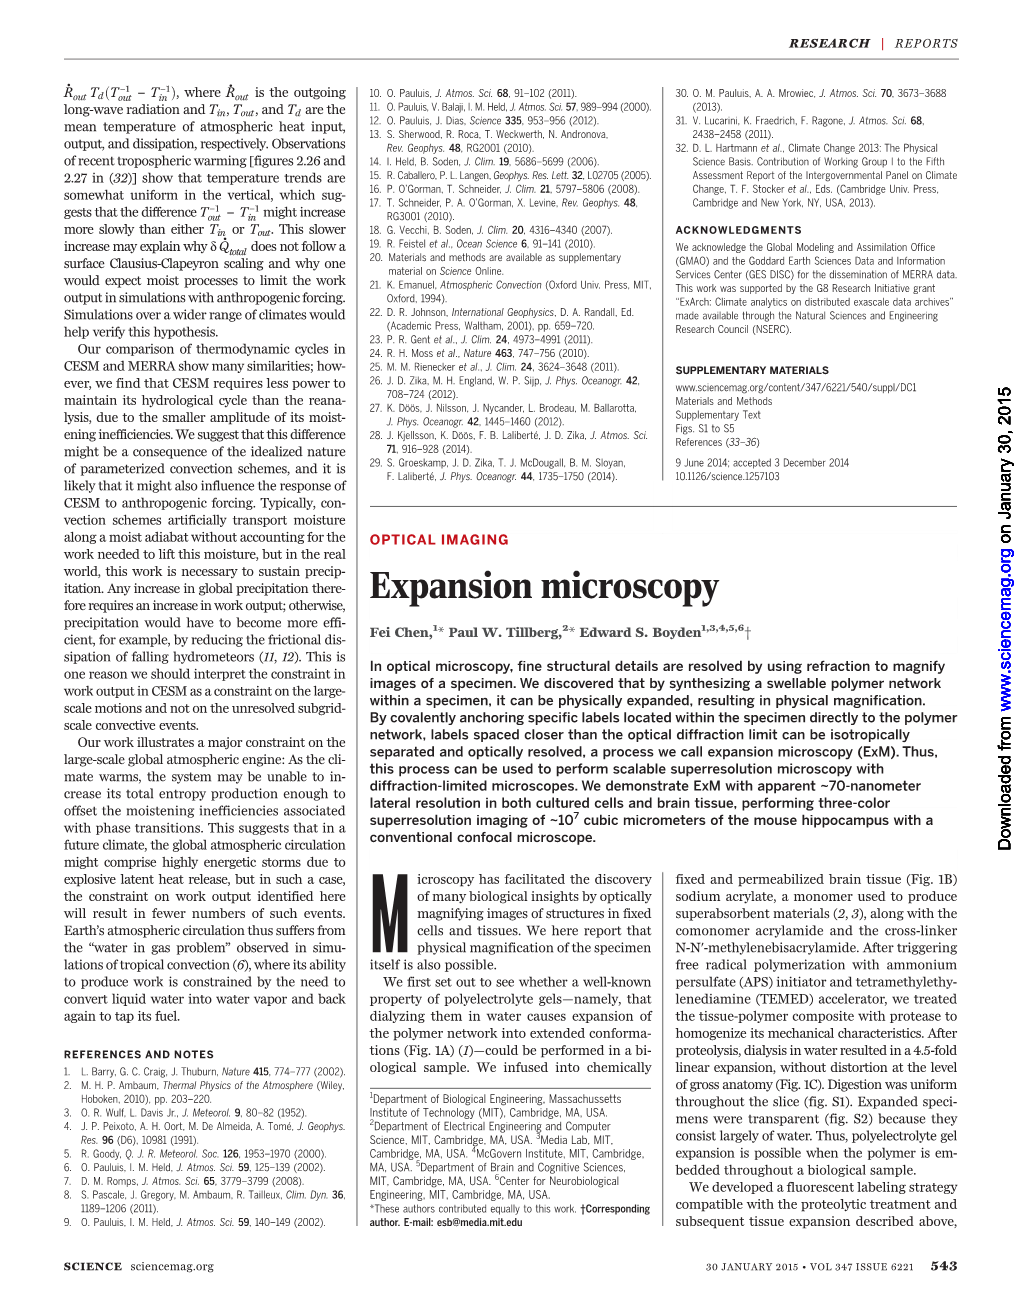 Expansion Microscopy Fore Requires an Increase in Work Output; Otherwise, Precipitation Would Have to Become More Effi- Fei Chen,1 Paul W